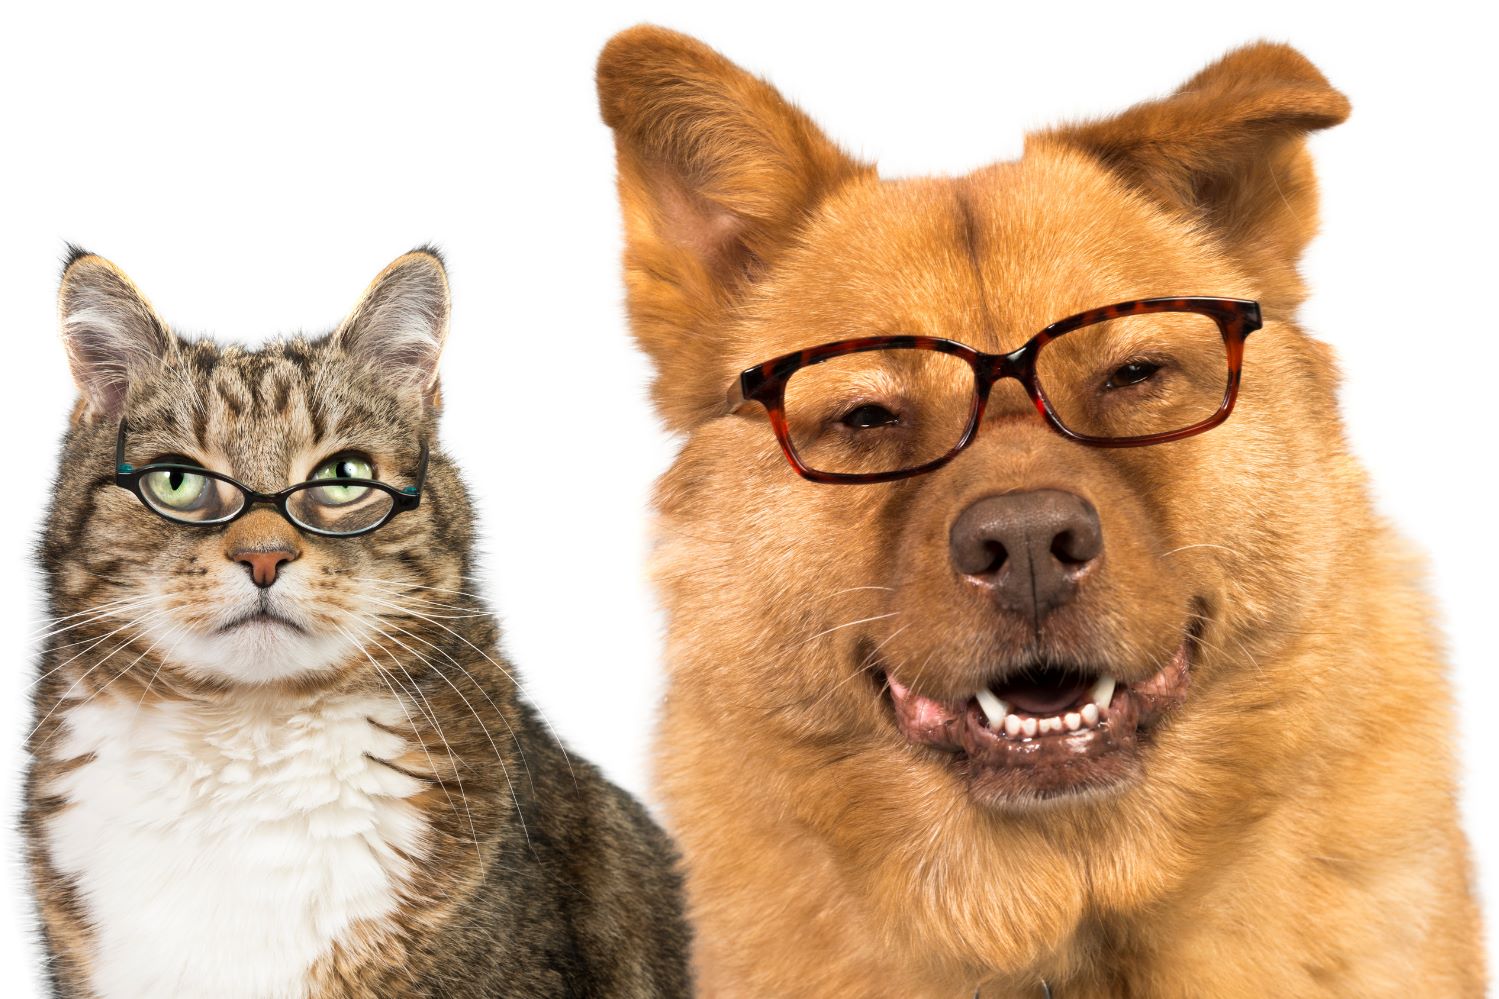 Dog and Cat Wearing Glasses by toe beans